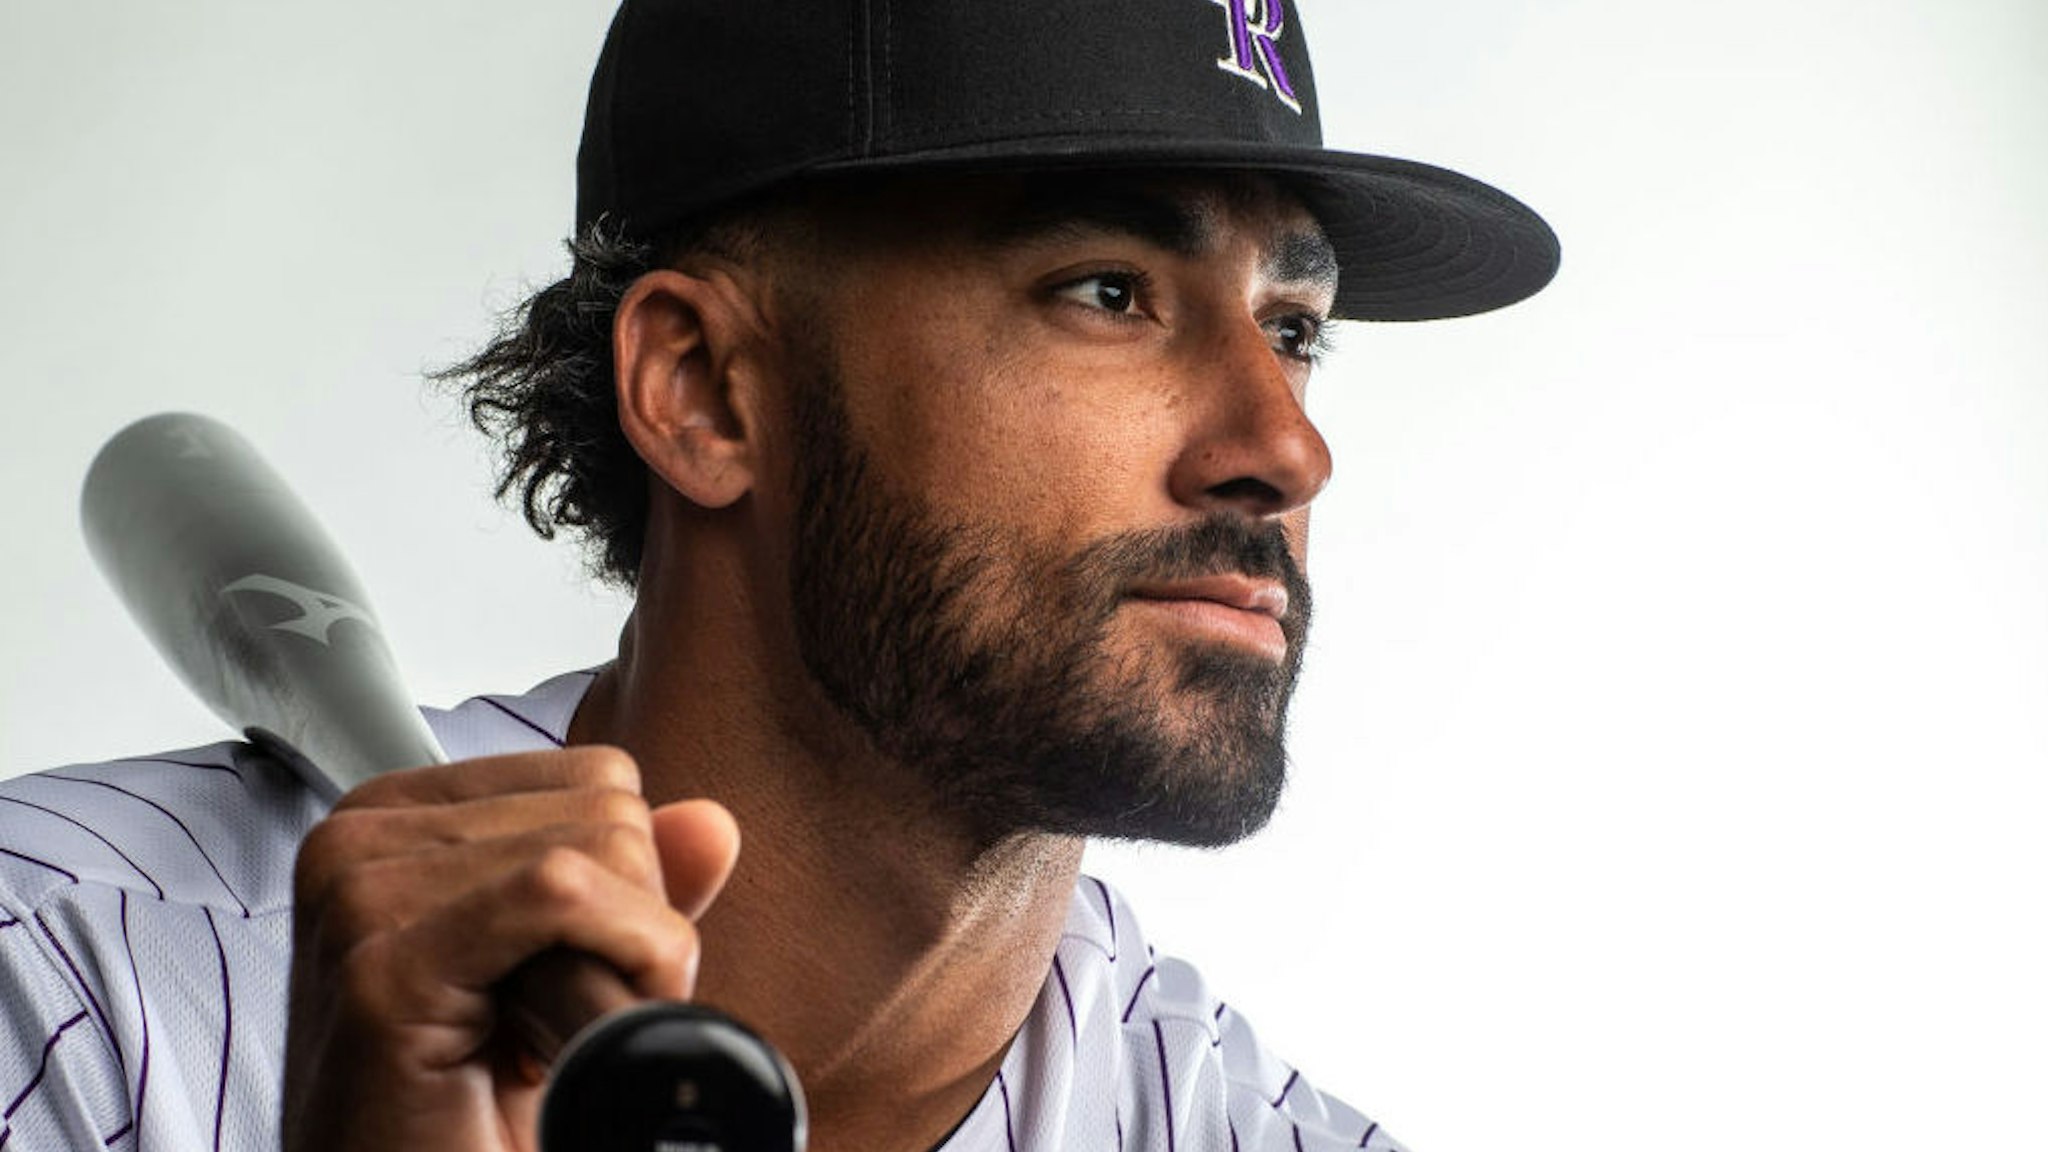 Ian Desmond #20 of the Colorado Rockies poses for a portrait during Photo Day at the Colorado Rockies Spring Training Facility at Salt River Fields at Talking Stick on February 19, 2020 in Scottsdale, Arizona.